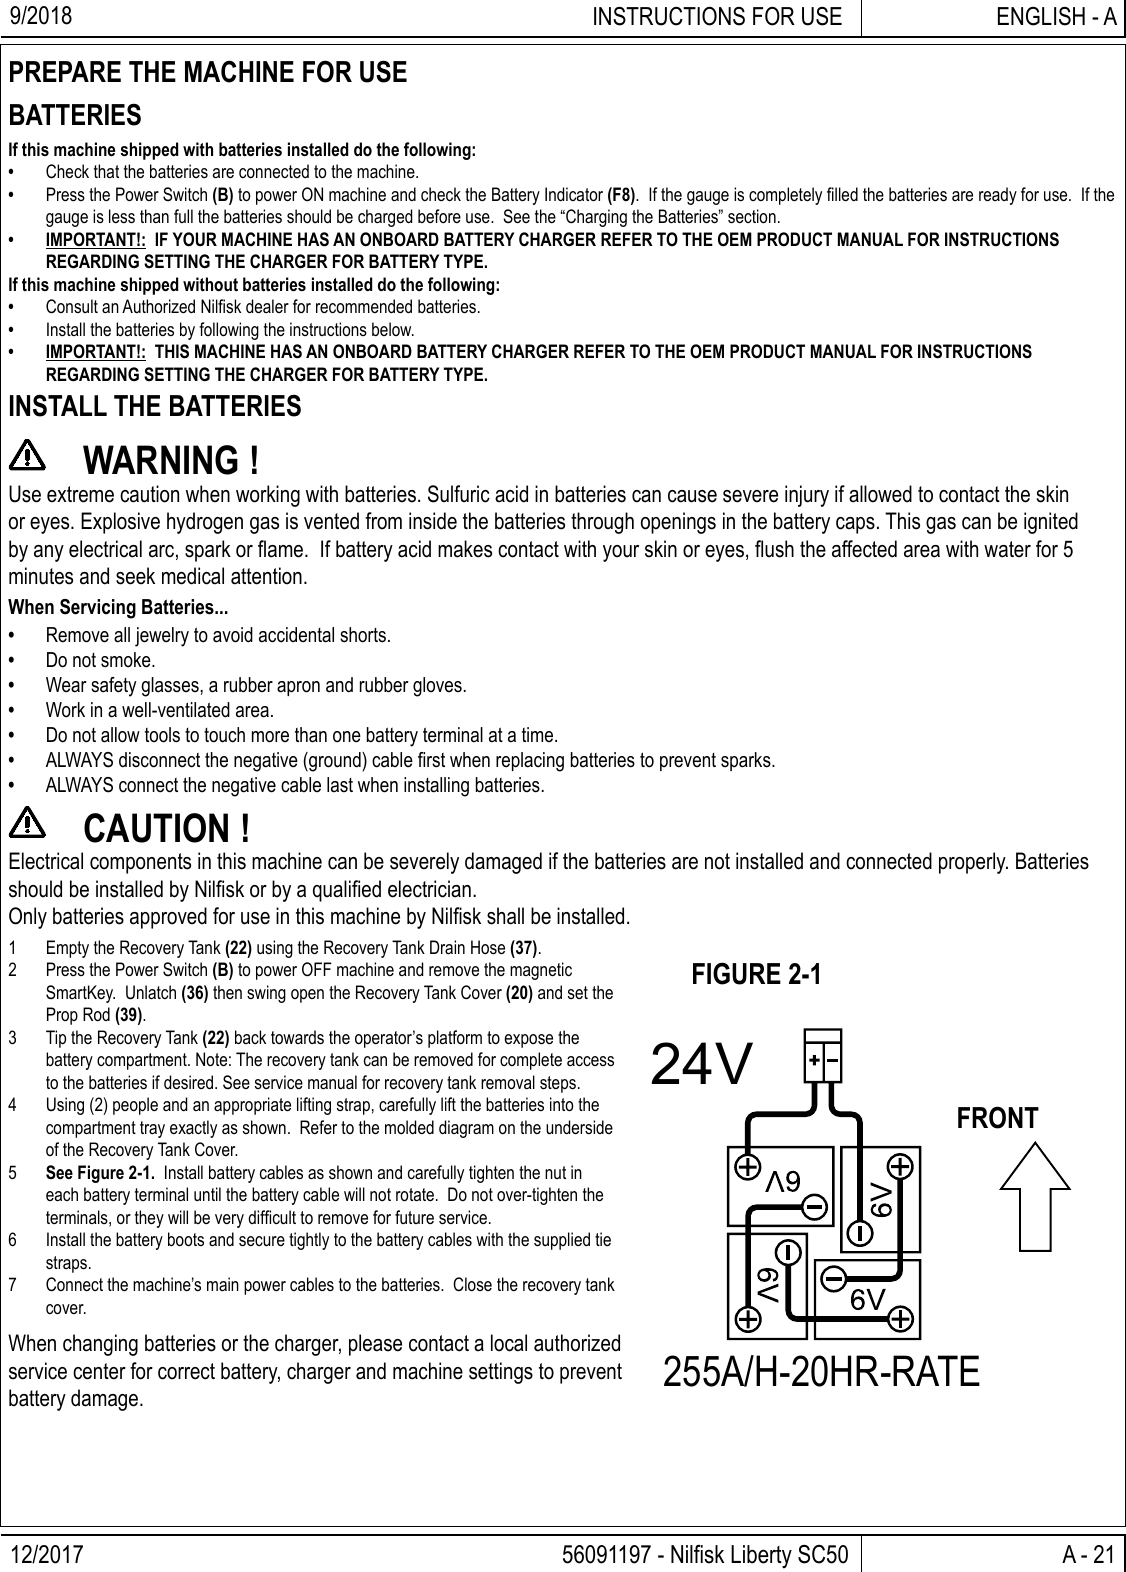 12/2017 A - 21 56091197 - Nilﬁ sk Liberty SC50ENGLISH - AINSTRUCTIONS FOR USE9/2018PREPARE THE MACHINE FOR USEBATTERIESIf this machine shipped with batteries installed do the following:•  Check that the batteries are connected to the machine.•  Press the Power Switch (B) to power ON machine and check the Battery Indicator (F8).  If the gauge is completely ﬁ lled the batteries are ready for use.  If the gauge is less than full the batteries should be charged before use.  See the “Charging the Batteries” section.•  IMPORTANT!:  IF YOUR MACHINE HAS AN ONBOARD BATTERY CHARGER REFER TO THE OEM PRODUCT MANUAL FOR INSTRUCTIONS REGARDING SETTING THE CHARGER FOR BATTERY TYPE.If this machine shipped without batteries installed do the following:•  Consult an Authorized Nilﬁ sk dealer for recommended batteries.•  Install the batteries by following the instructions below.•  IMPORTANT!:  THIS MACHINE HAS AN ONBOARD BATTERY CHARGER REFER TO THE OEM PRODUCT MANUAL FOR INSTRUCTIONS REGARDING SETTING THE CHARGER FOR BATTERY TYPE.INSTALL THE BATTERIES WARNING !Use extreme caution when working with batteries. Sulfuric acid in batteries can cause severe injury if allowed to contact the skin or eyes. Explosive hydrogen gas is vented from inside the batteries through openings in the battery caps. This gas can be ignited by any electrical arc, spark or ﬂ ame.  If battery acid makes contact with your skin or eyes, ﬂ ush the affected area with water for 5 minutes and seek medical attention.When Servicing Batteries...•  Remove all jewelry to avoid accidental shorts.•  Do not smoke.•  Wear safety glasses, a rubber apron and rubber gloves.•  Work in a well-ventilated area.•  Do not allow tools to touch more than one battery terminal at a time.•  ALWAYS disconnect the negative (ground) cable ﬁ rst when replacing batteries to prevent sparks.•  ALWAYS connect the negative cable last when installing batteries. CAUTION !Electrical components in this machine can be severely damaged if the batteries are not installed and connected properly. Batteries should be installed by Nilﬁ sk or by a qualiﬁ ed electrician.Only batteries approved for use in this machine by Nilﬁ sk shall be installed.24V255A/H-20HR-RATE1  Empty the Recovery Tank (22) using the Recovery Tank Drain Hose (37).2  Press the Power Switch (B) to power OFF machine and remove the magnetic SmartKey.  Unlatch (36) then swing open the Recovery Tank Cover (20) and set the Prop Rod (39).3  Tip the Recovery Tank (22) back towards the operator’s platform to expose the battery compartment. Note: The recovery tank can be removed for complete access to the batteries if desired. See service manual for recovery tank removal steps.4  Using (2) people and an appropriate lifting strap, carefully lift the batteries into the compartment tray exactly as shown.  Refer to the molded diagram on the underside of the Recovery Tank Cover.5  See Figure 2-1.  Install battery cables as shown and carefully tighten the nut in each battery terminal until the battery cable will not rotate.  Do not over-tighten the terminals, or they will be very difﬁ cult to remove for future service.6  Install the battery boots and secure tightly to the battery cables with the supplied tie straps.7  Connect the machine’s main power cables to the batteries.  Close the recovery tank cover.When changing batteries or the charger, please contact a local authorized service center for correct battery, charger and machine settings to prevent battery damage.FIGURE 2-1FRONT